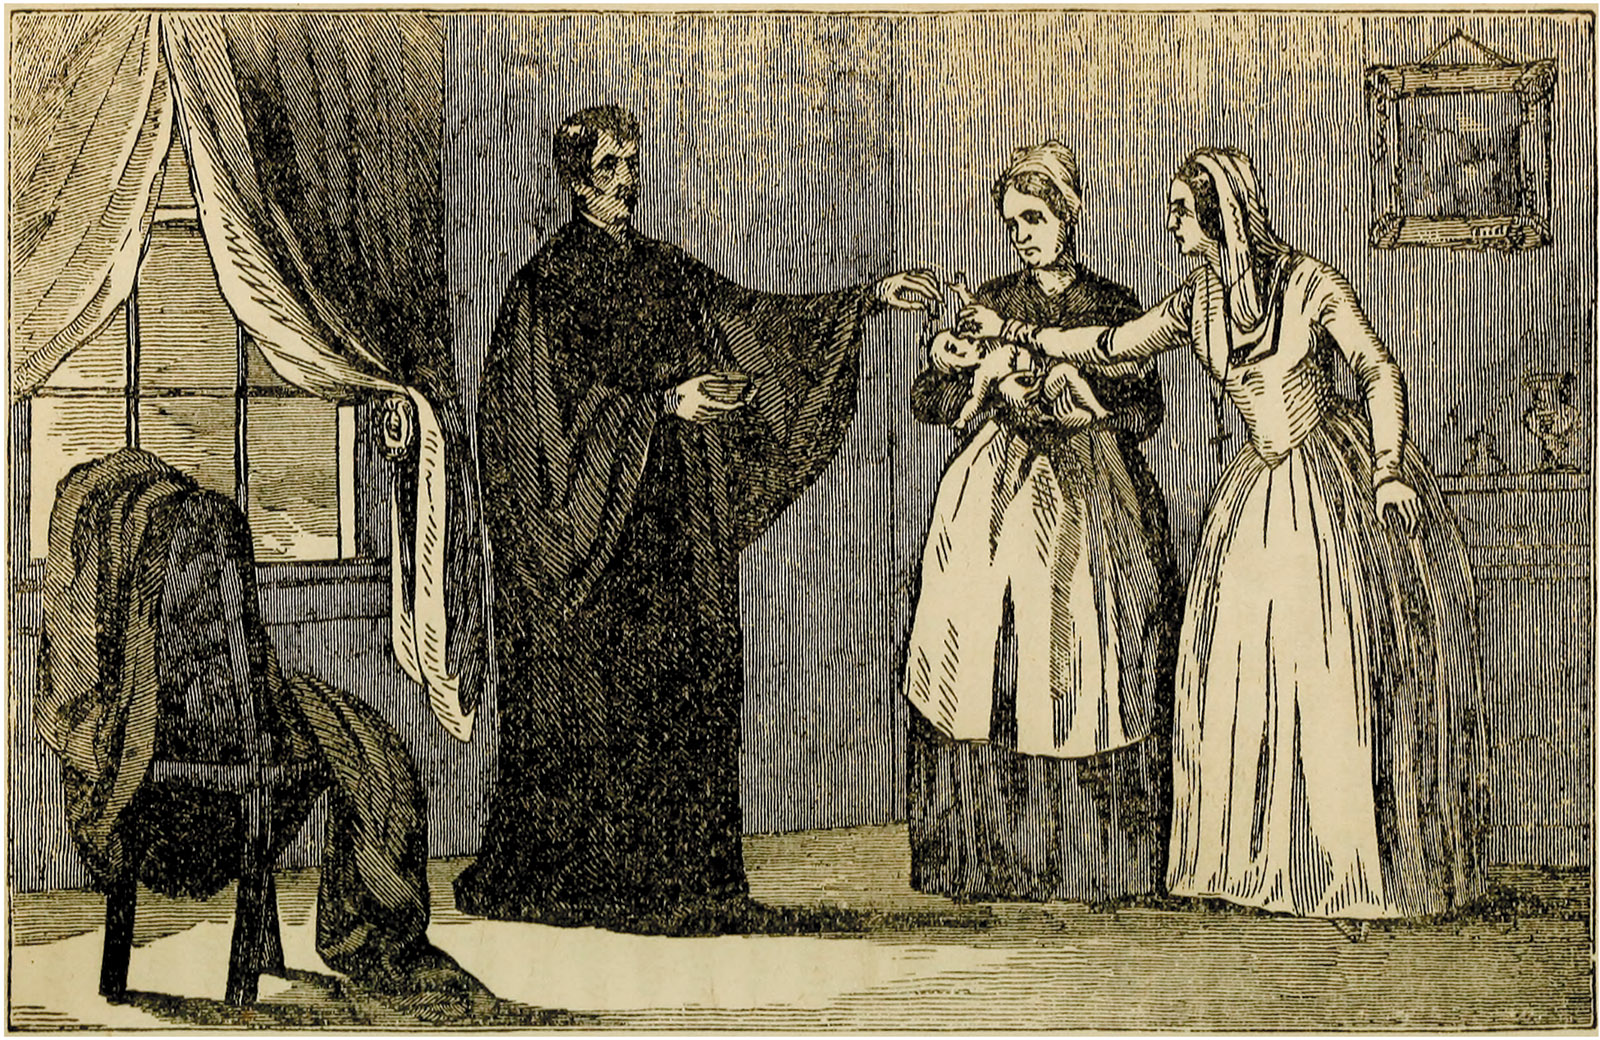 ‘Mother Abbess Strangling the Infant’; lithograph from the anti-Catholic pamphlet Popery!: As It Was and as It Is, 1845